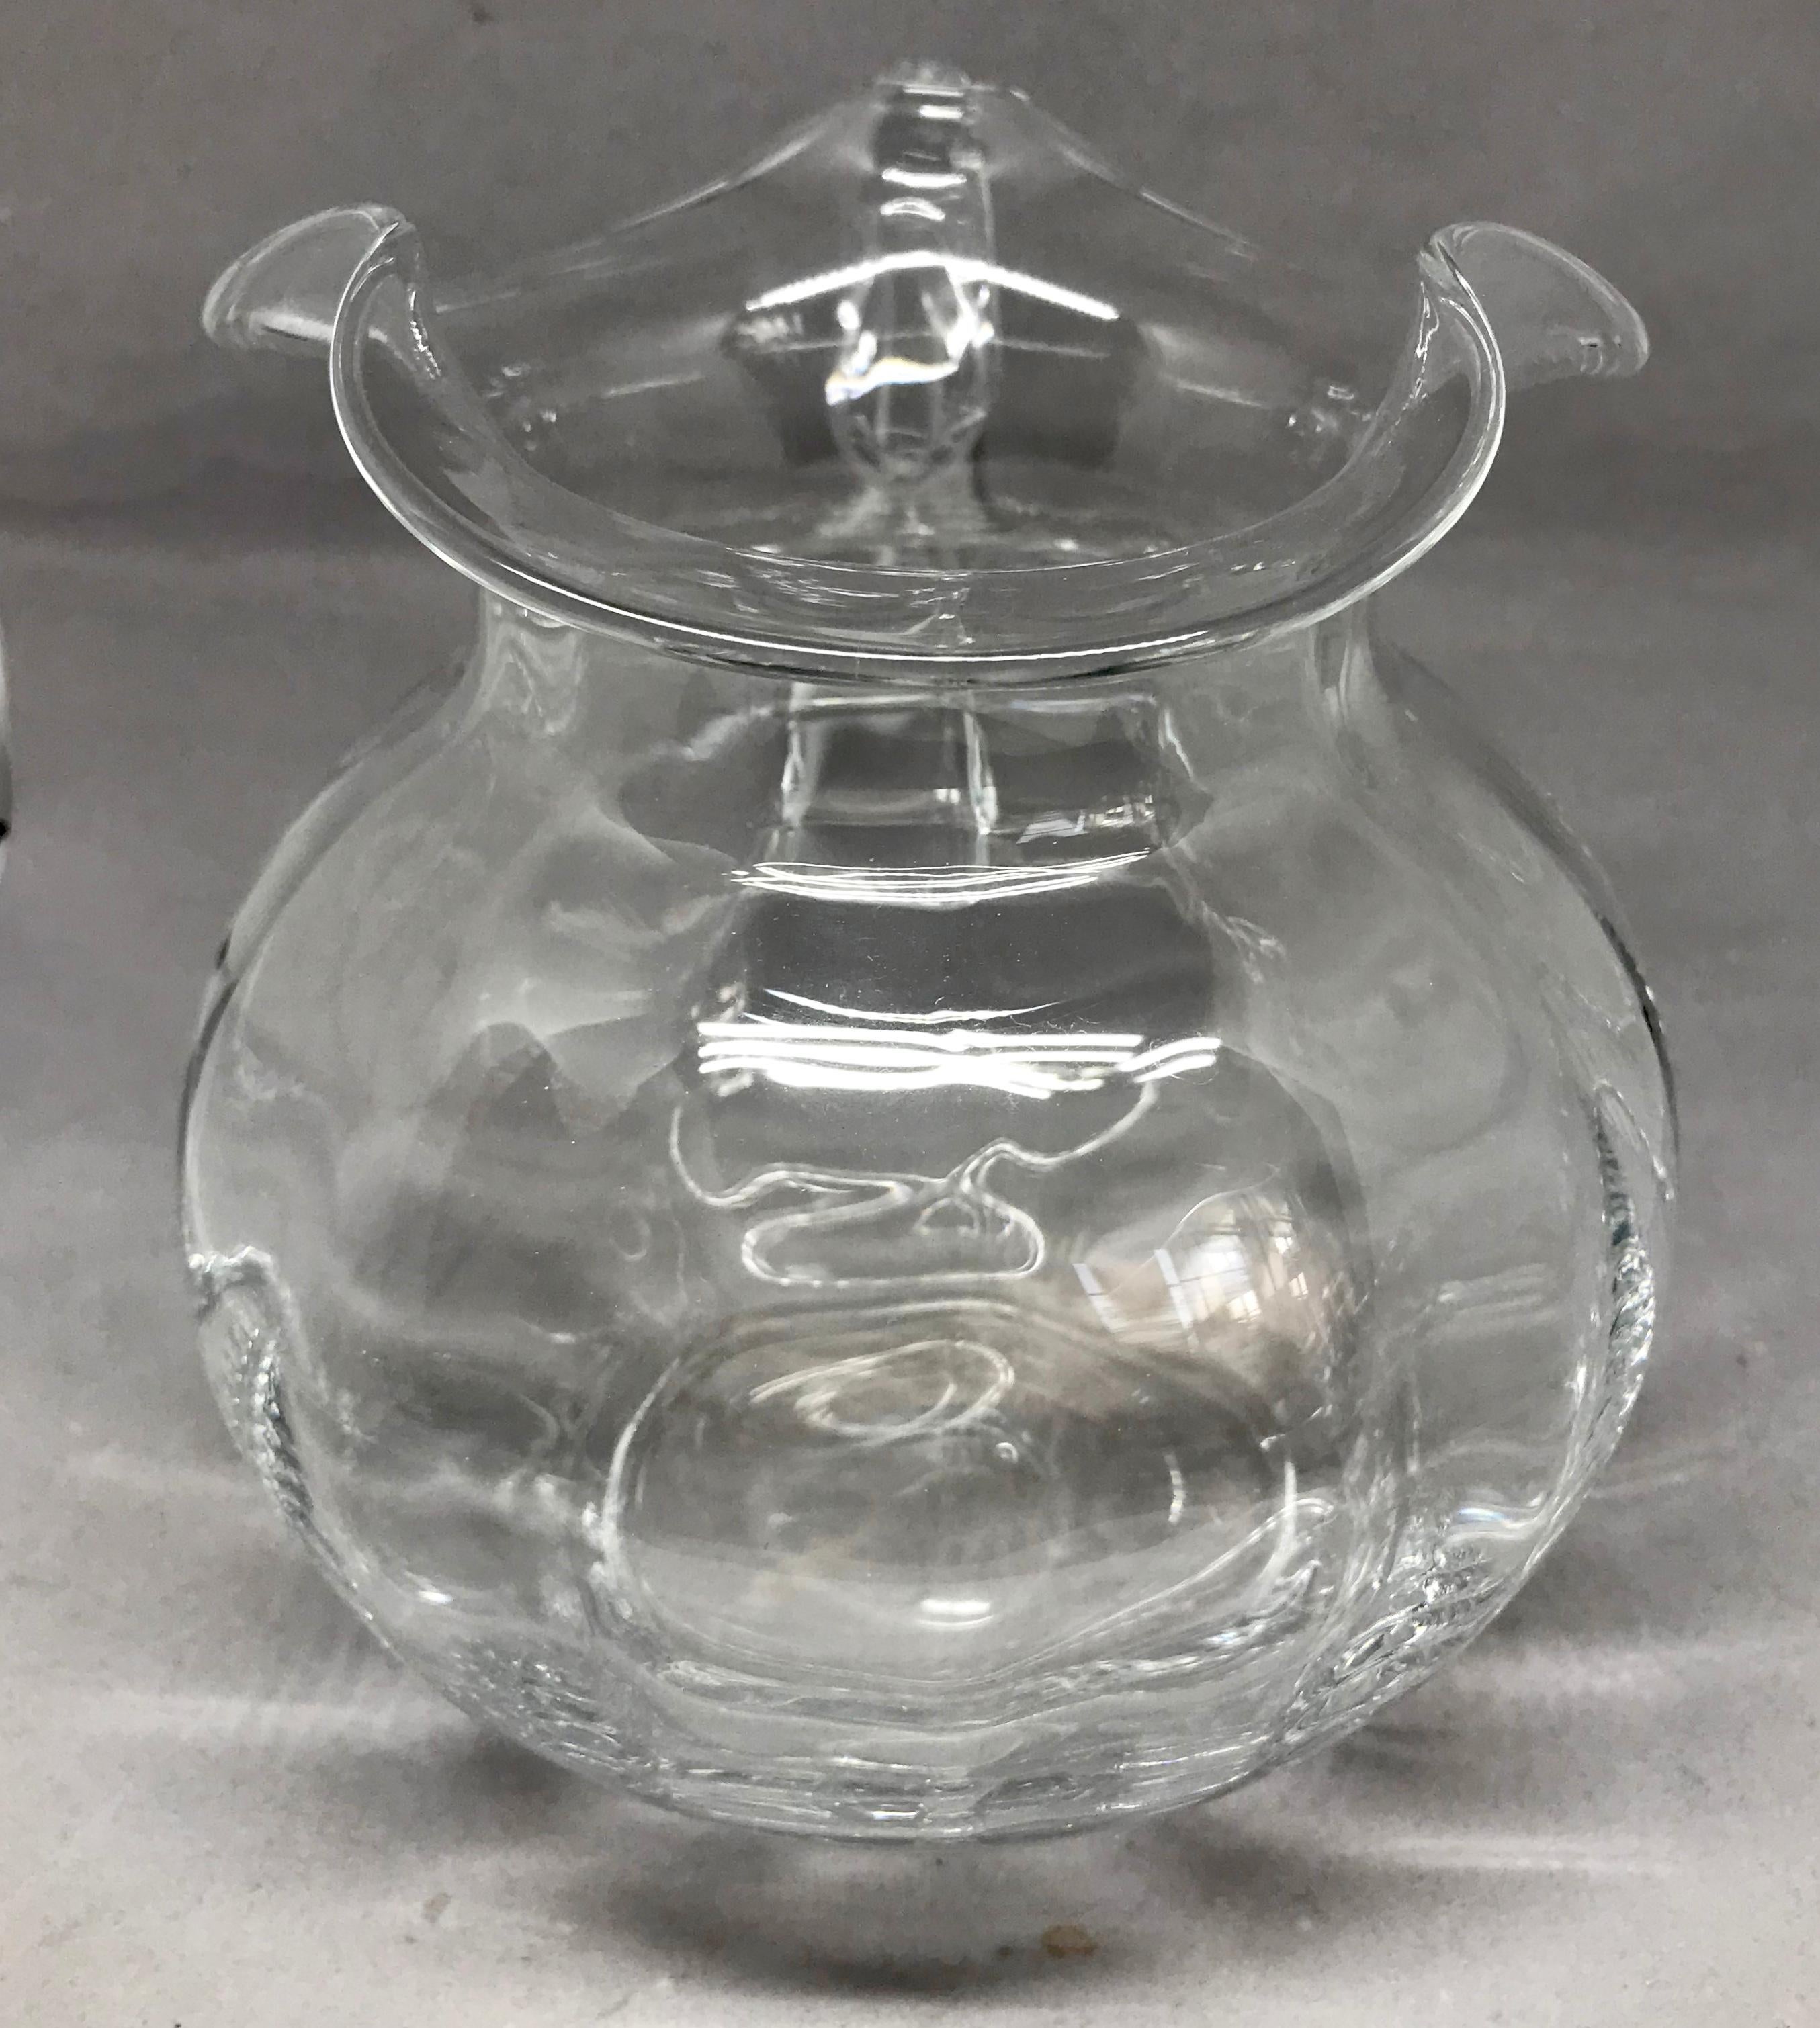 Tiffany & Co. glass pitcher. Classic American glass pitcher in the iconic Tiffany Bundle shape, United States, late 20th century. 
Dimensions: approximately 7